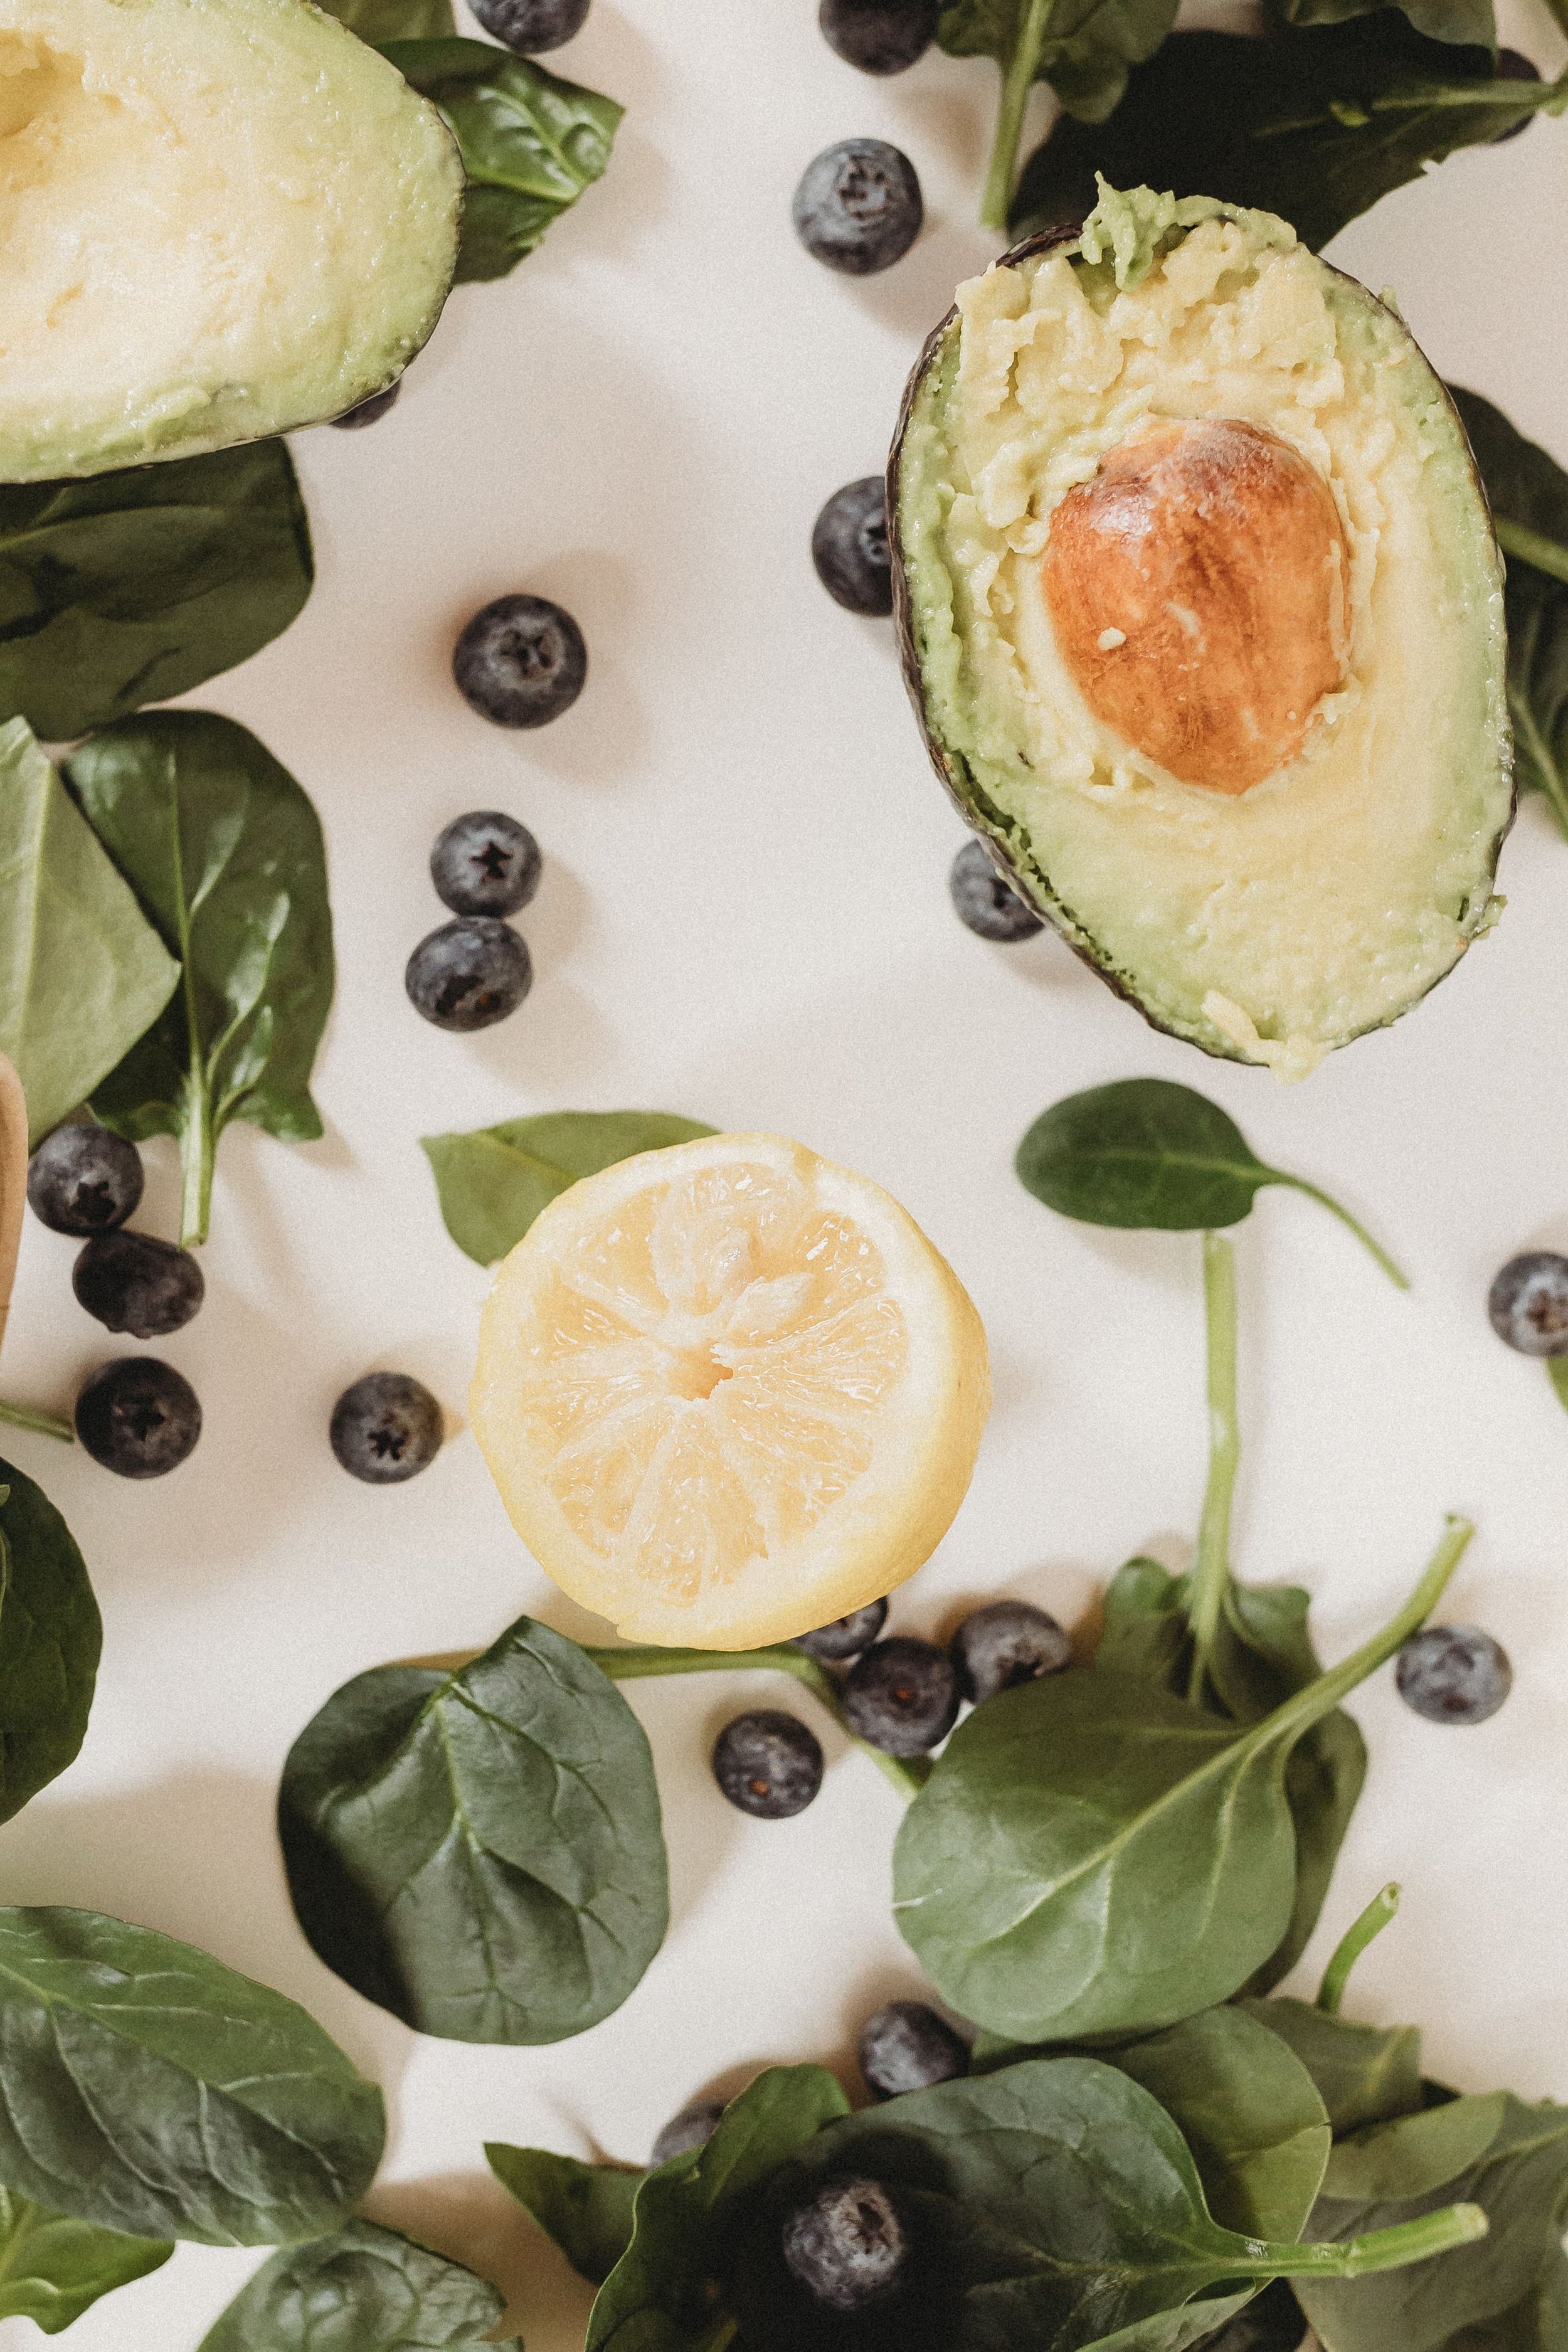  spinach and blueberries and lemons and avocados are scattered around a white backdrop during a professional food brand shoot 